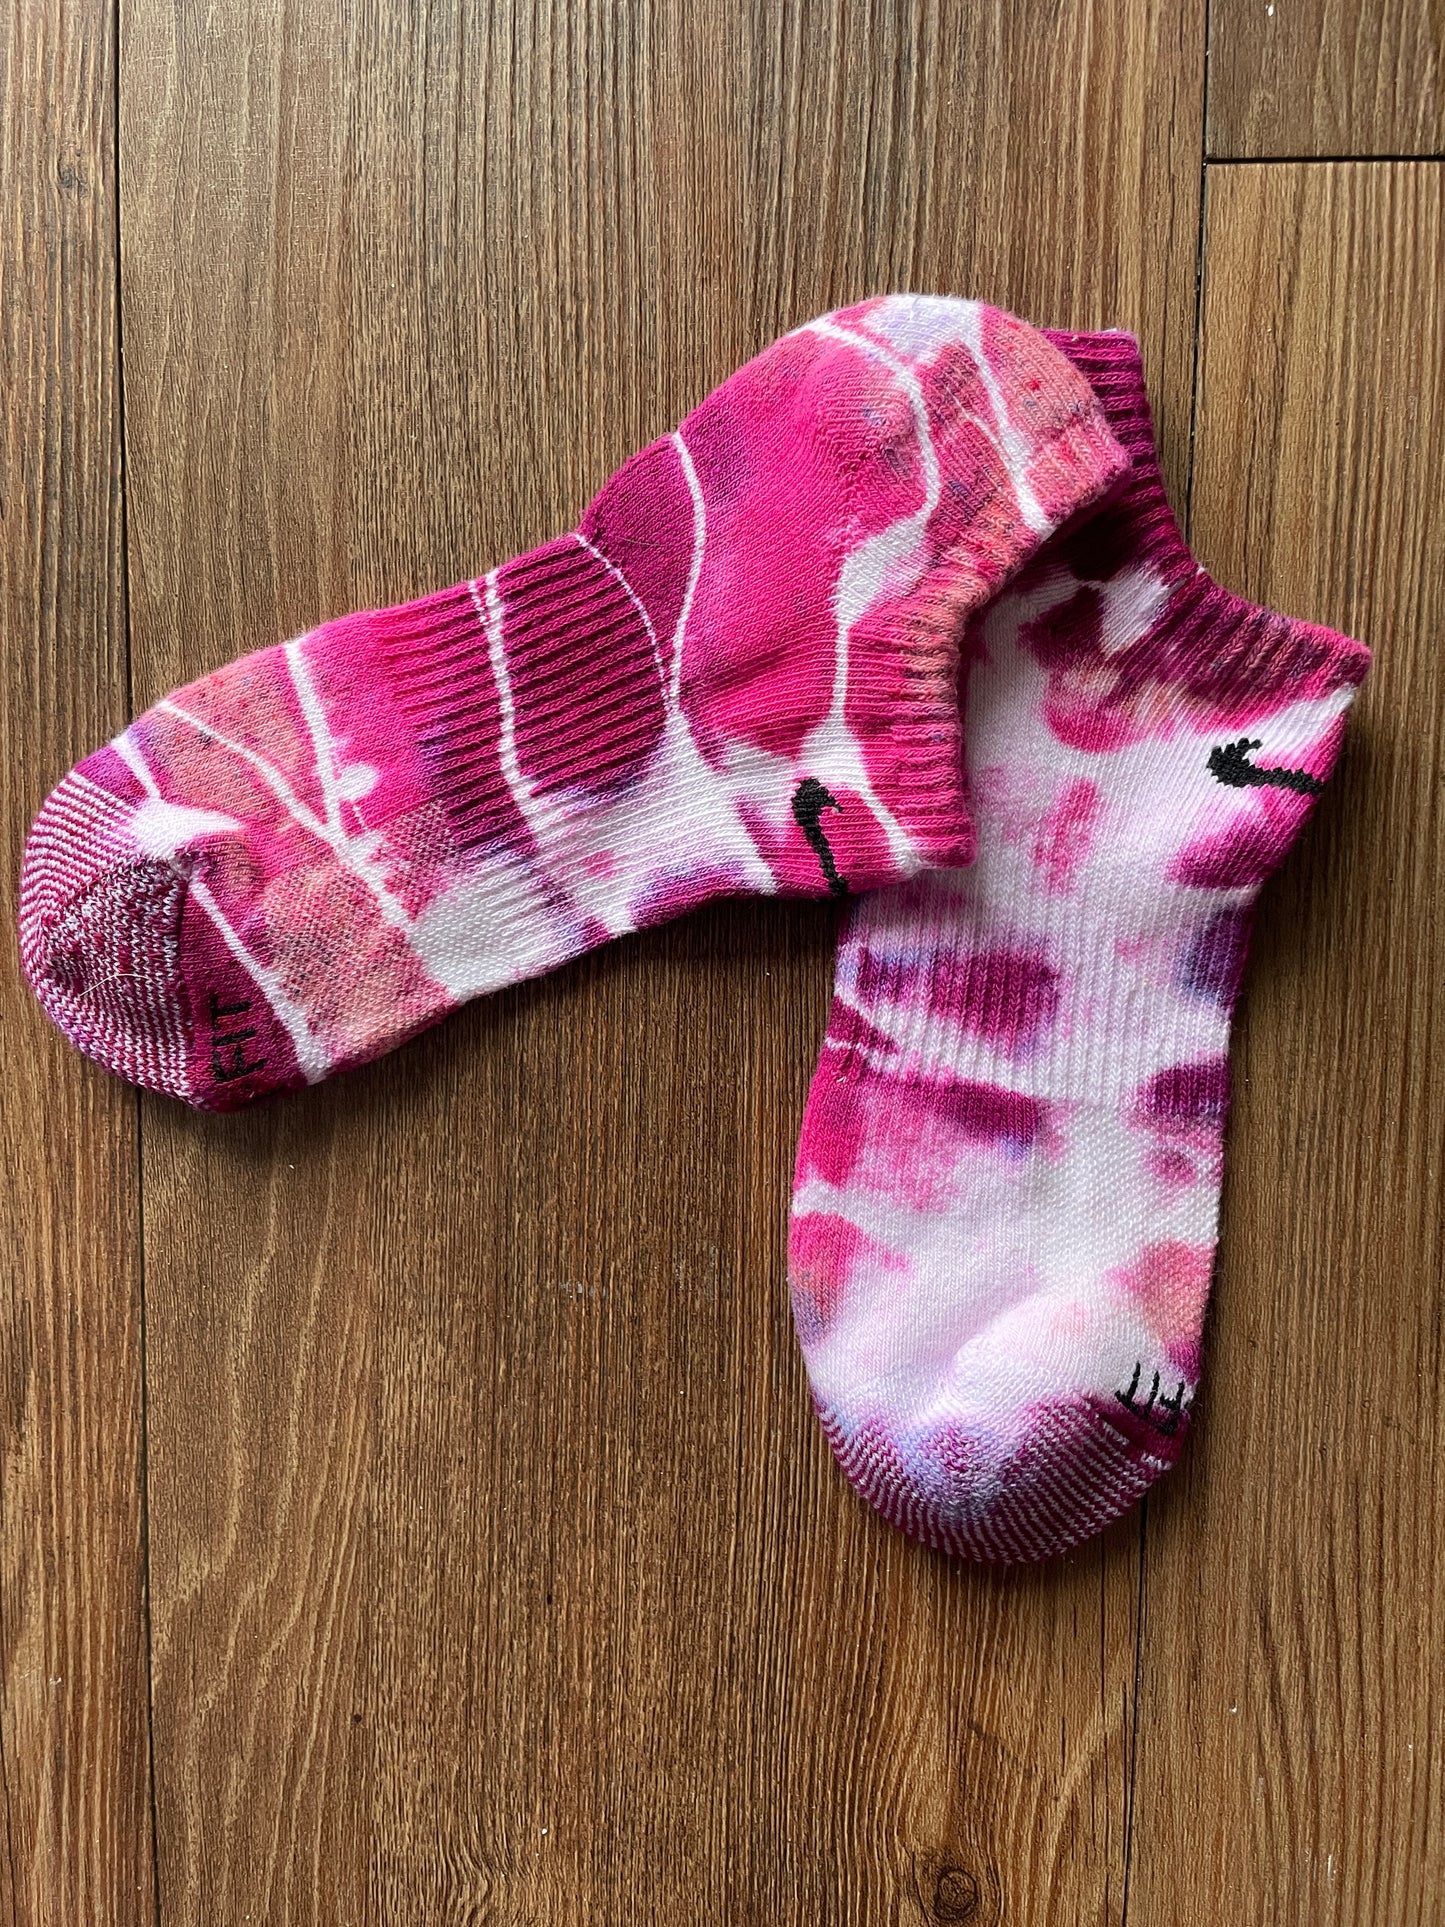 Shades of Pink and White Tie Dye Nike Dri-FIT Everyday Plus Ankle Socks - Size Medium (Men's 6-8/Women's 7-10)